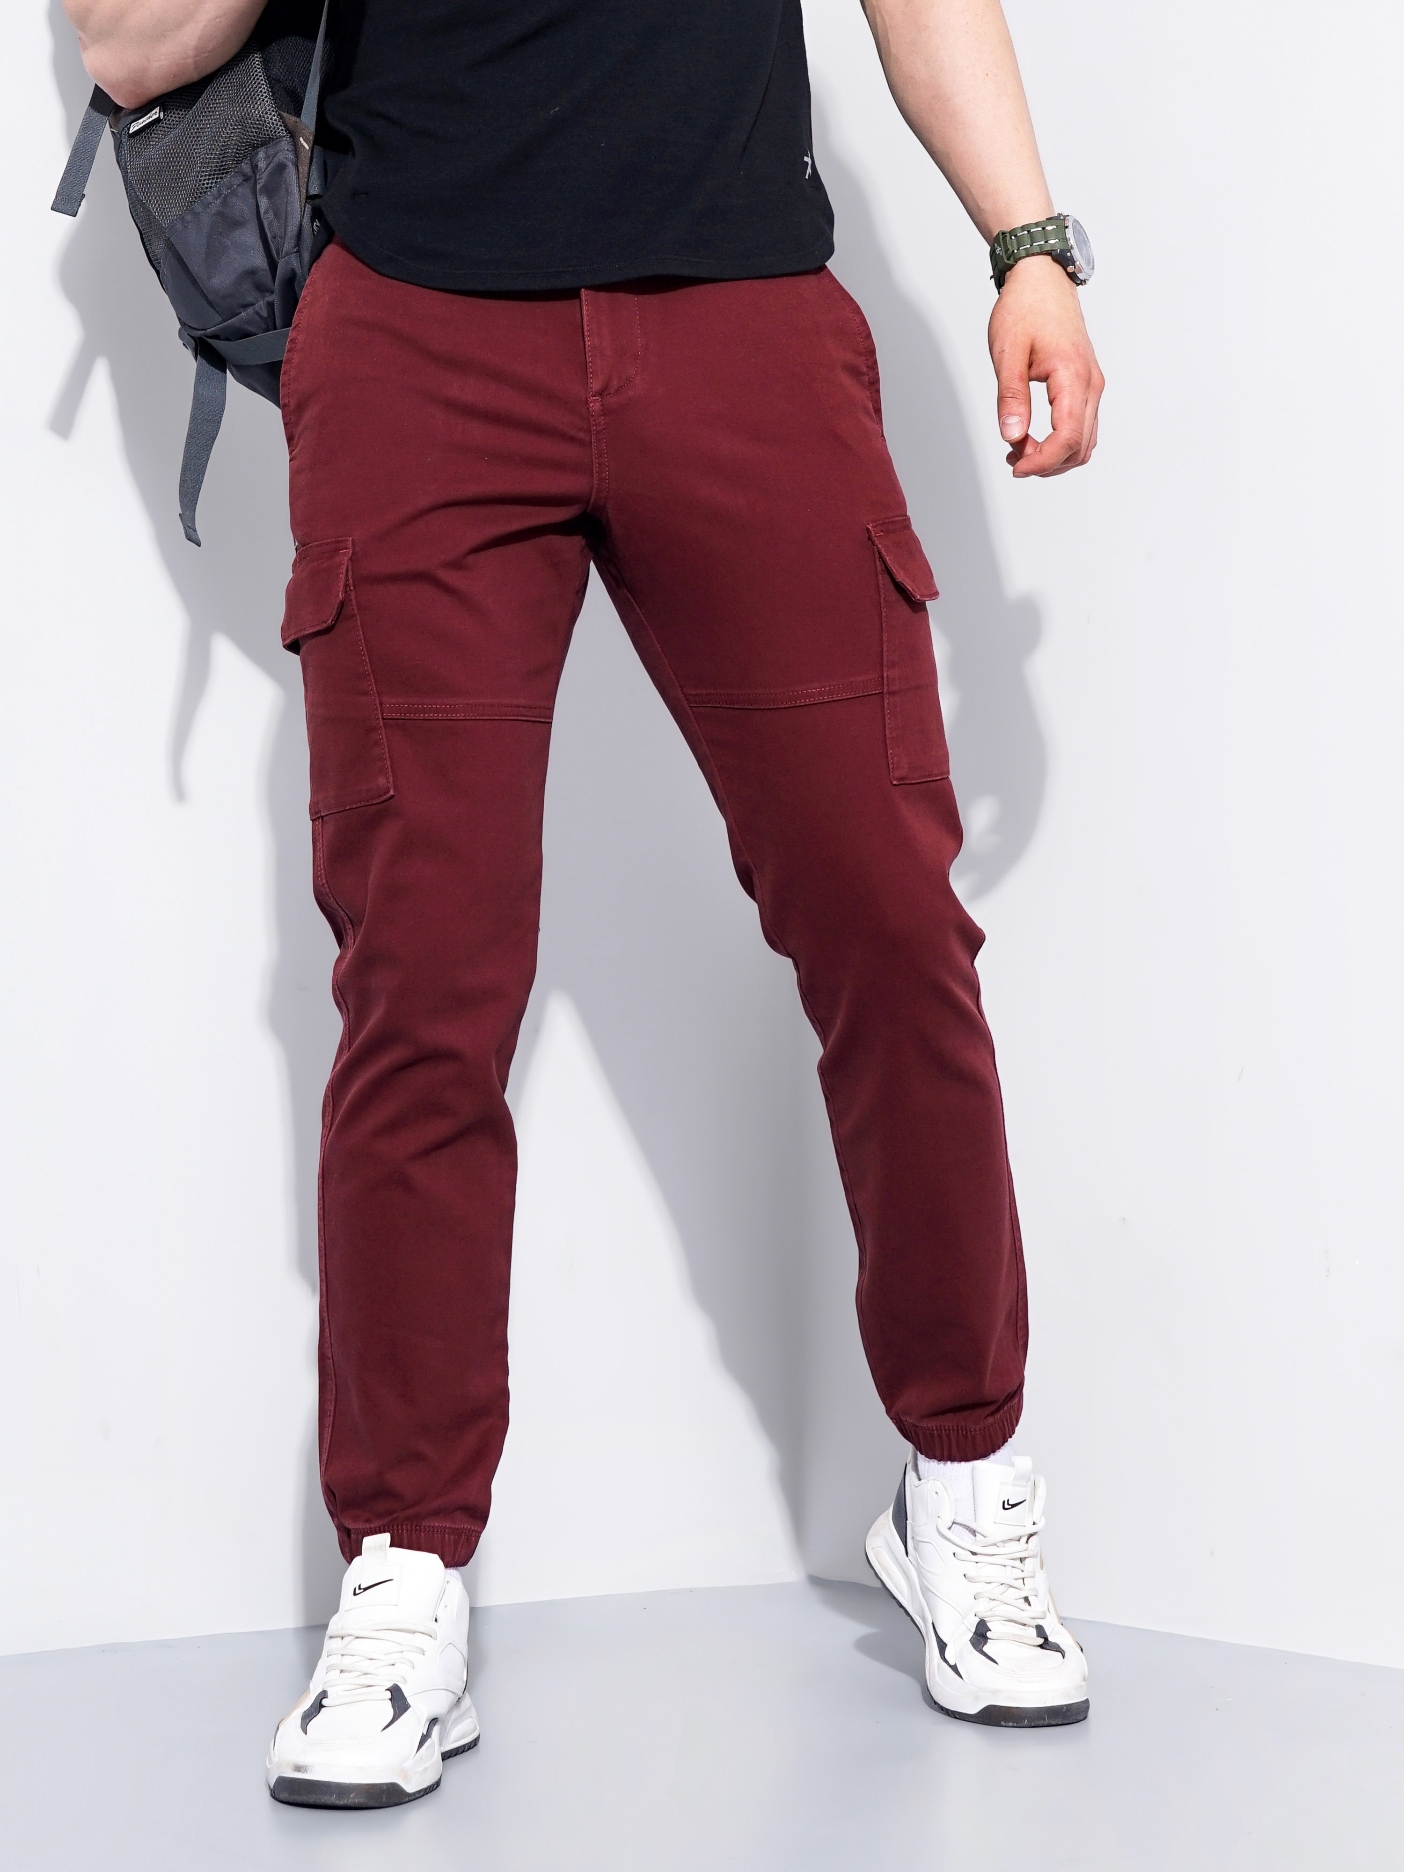 Men's Red Cotton Blend Handwoven Trousers